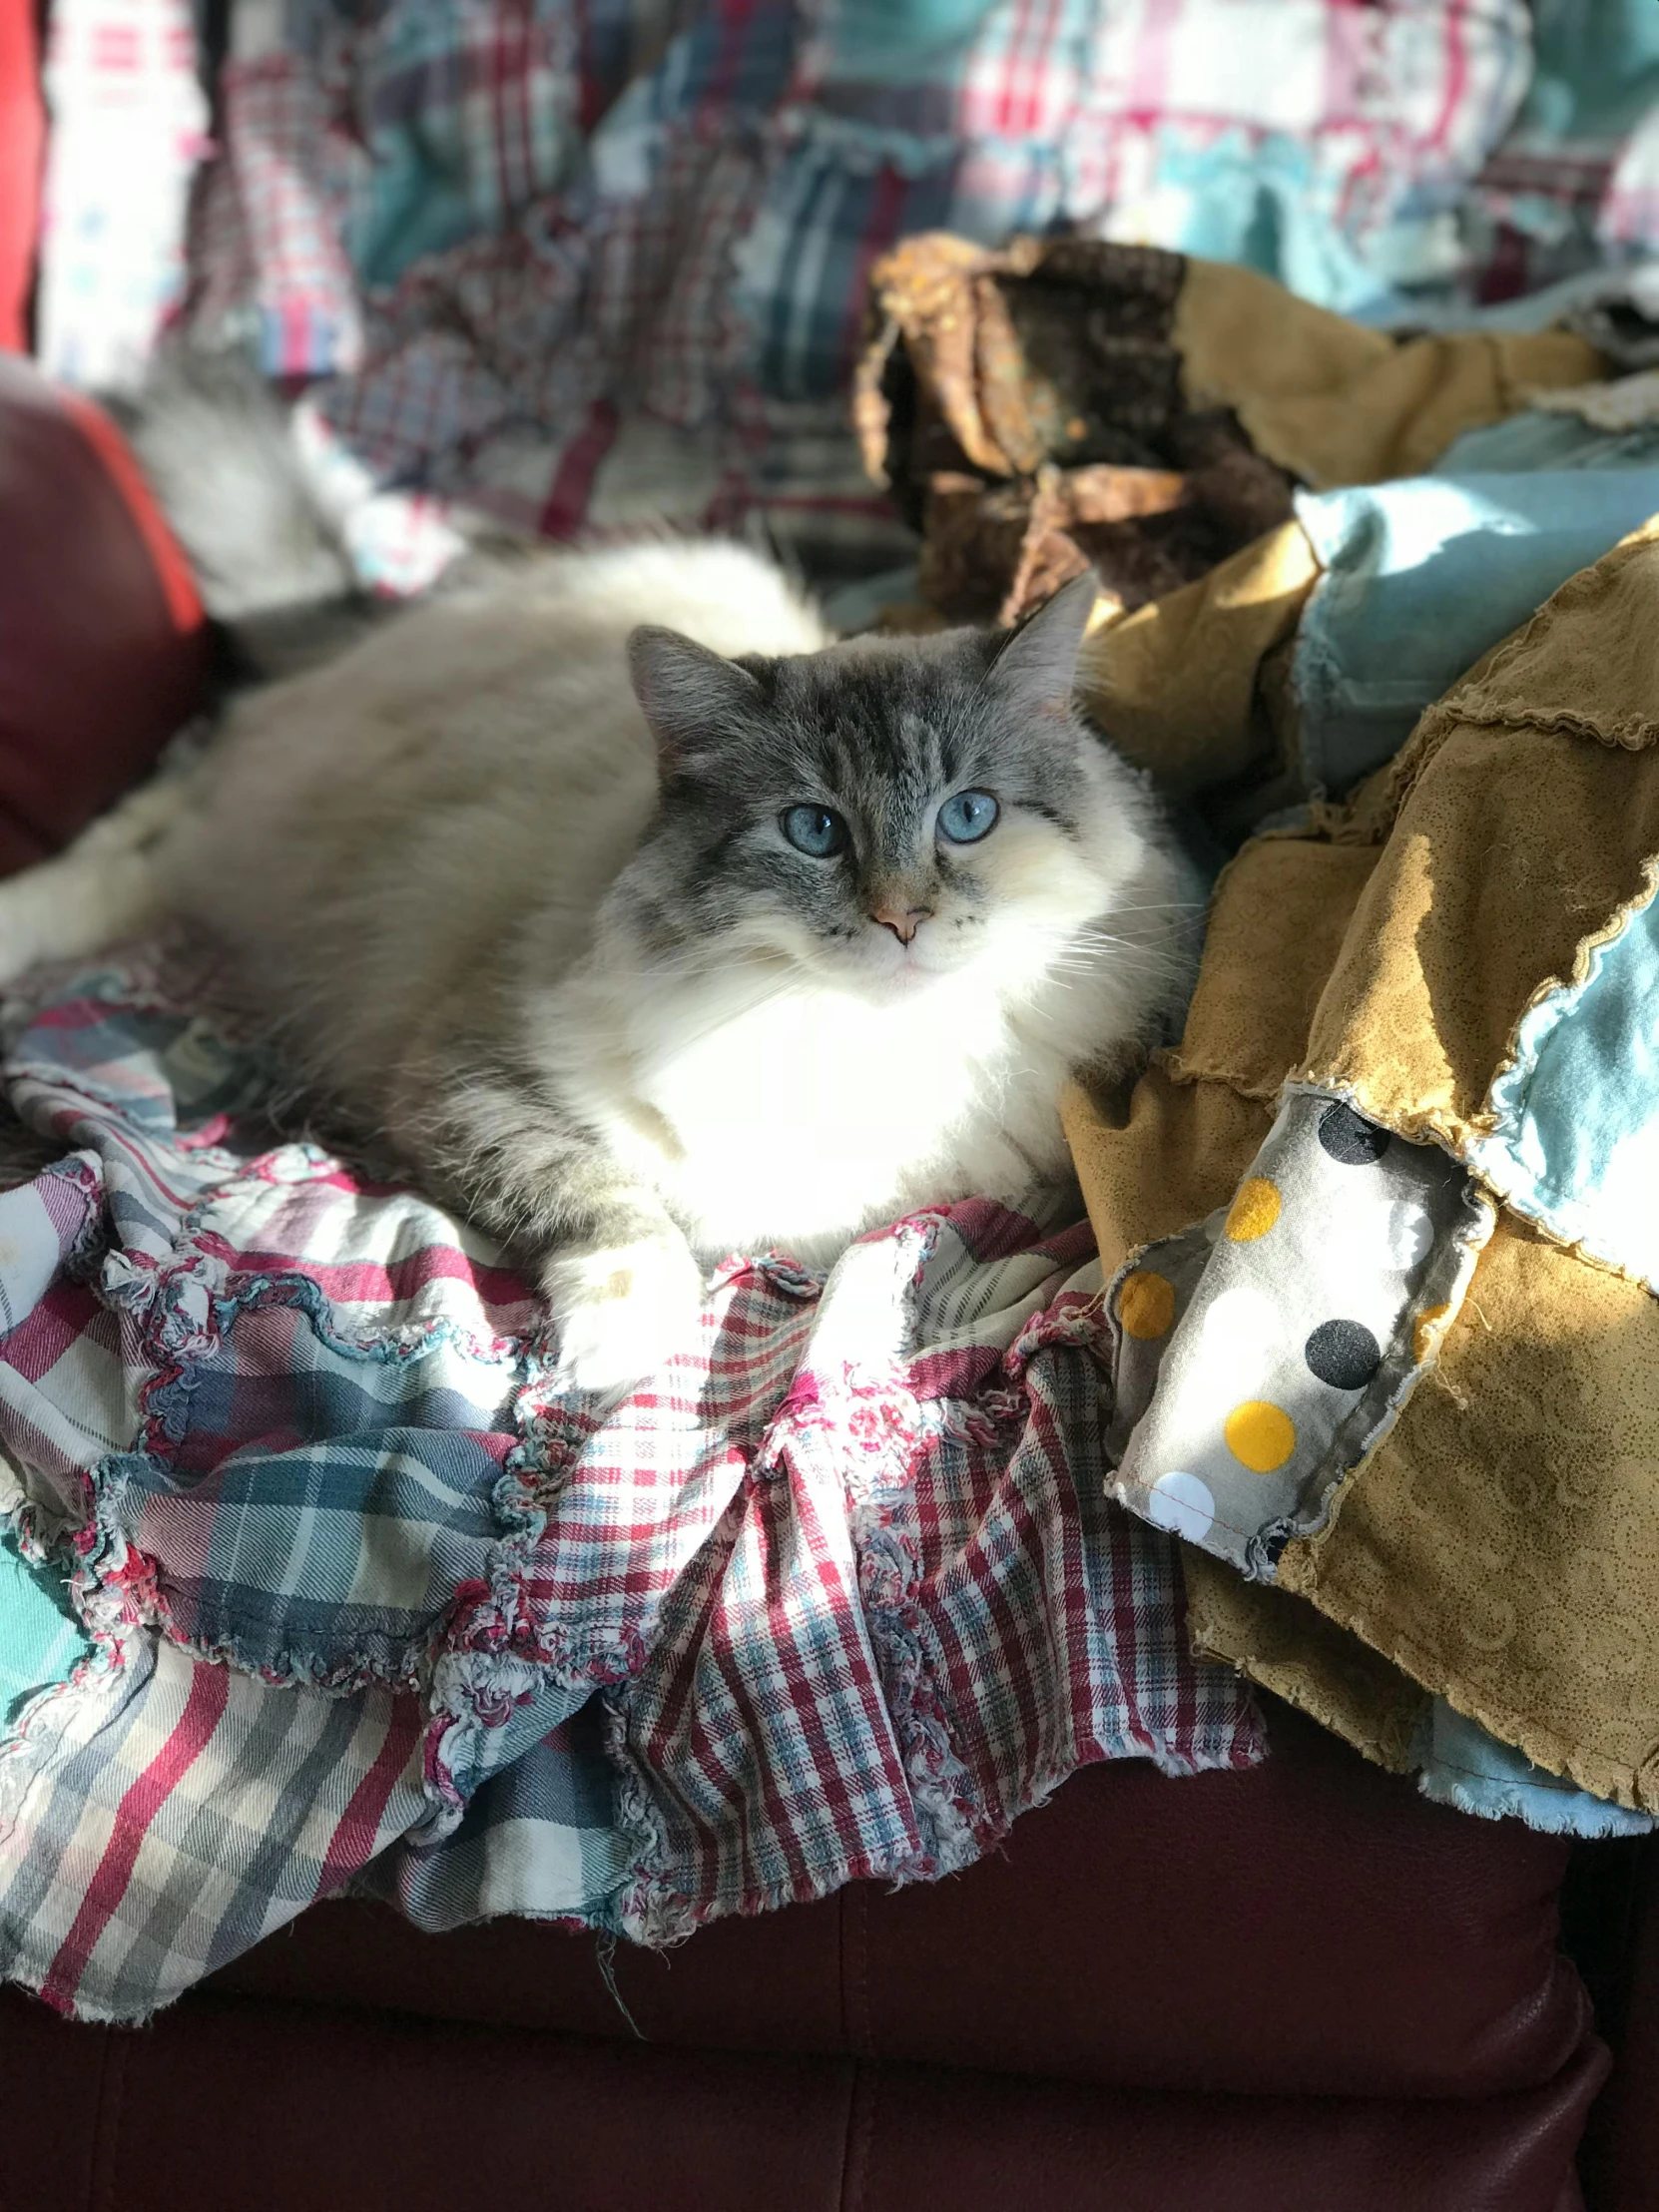 a cat with blue eyes laying on some clothes